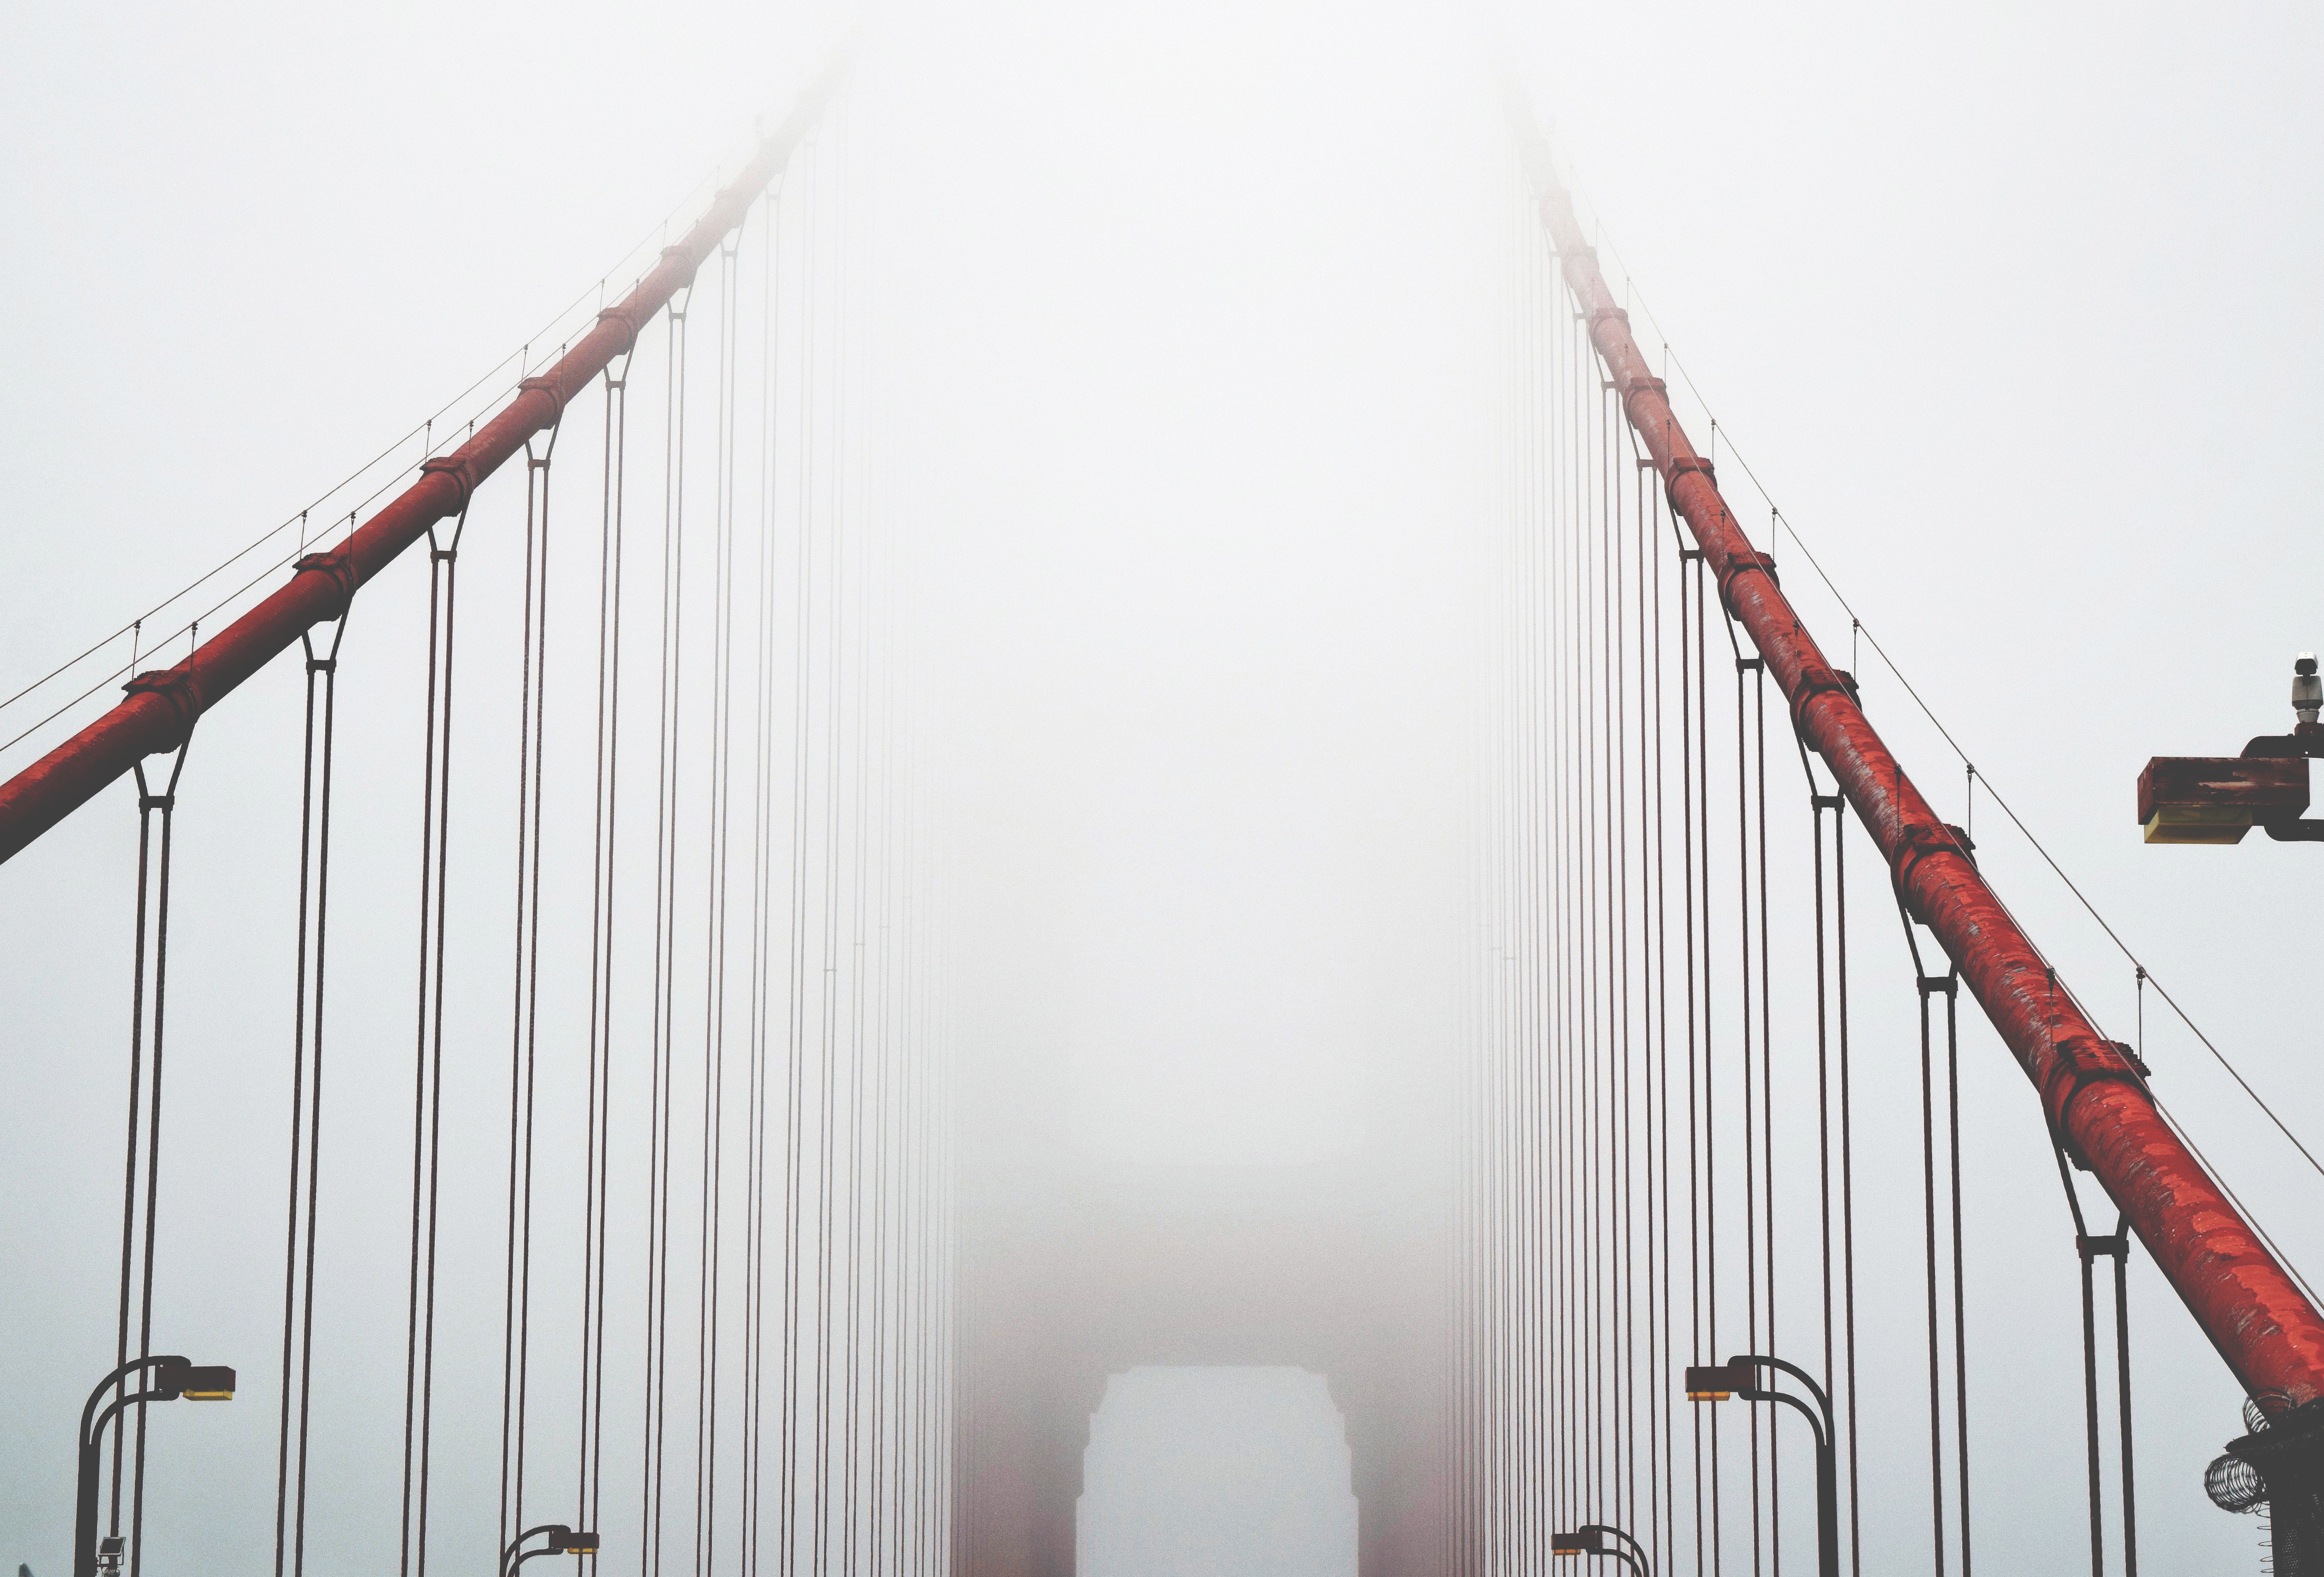 Cables of a suspension bridge shrouded in fog